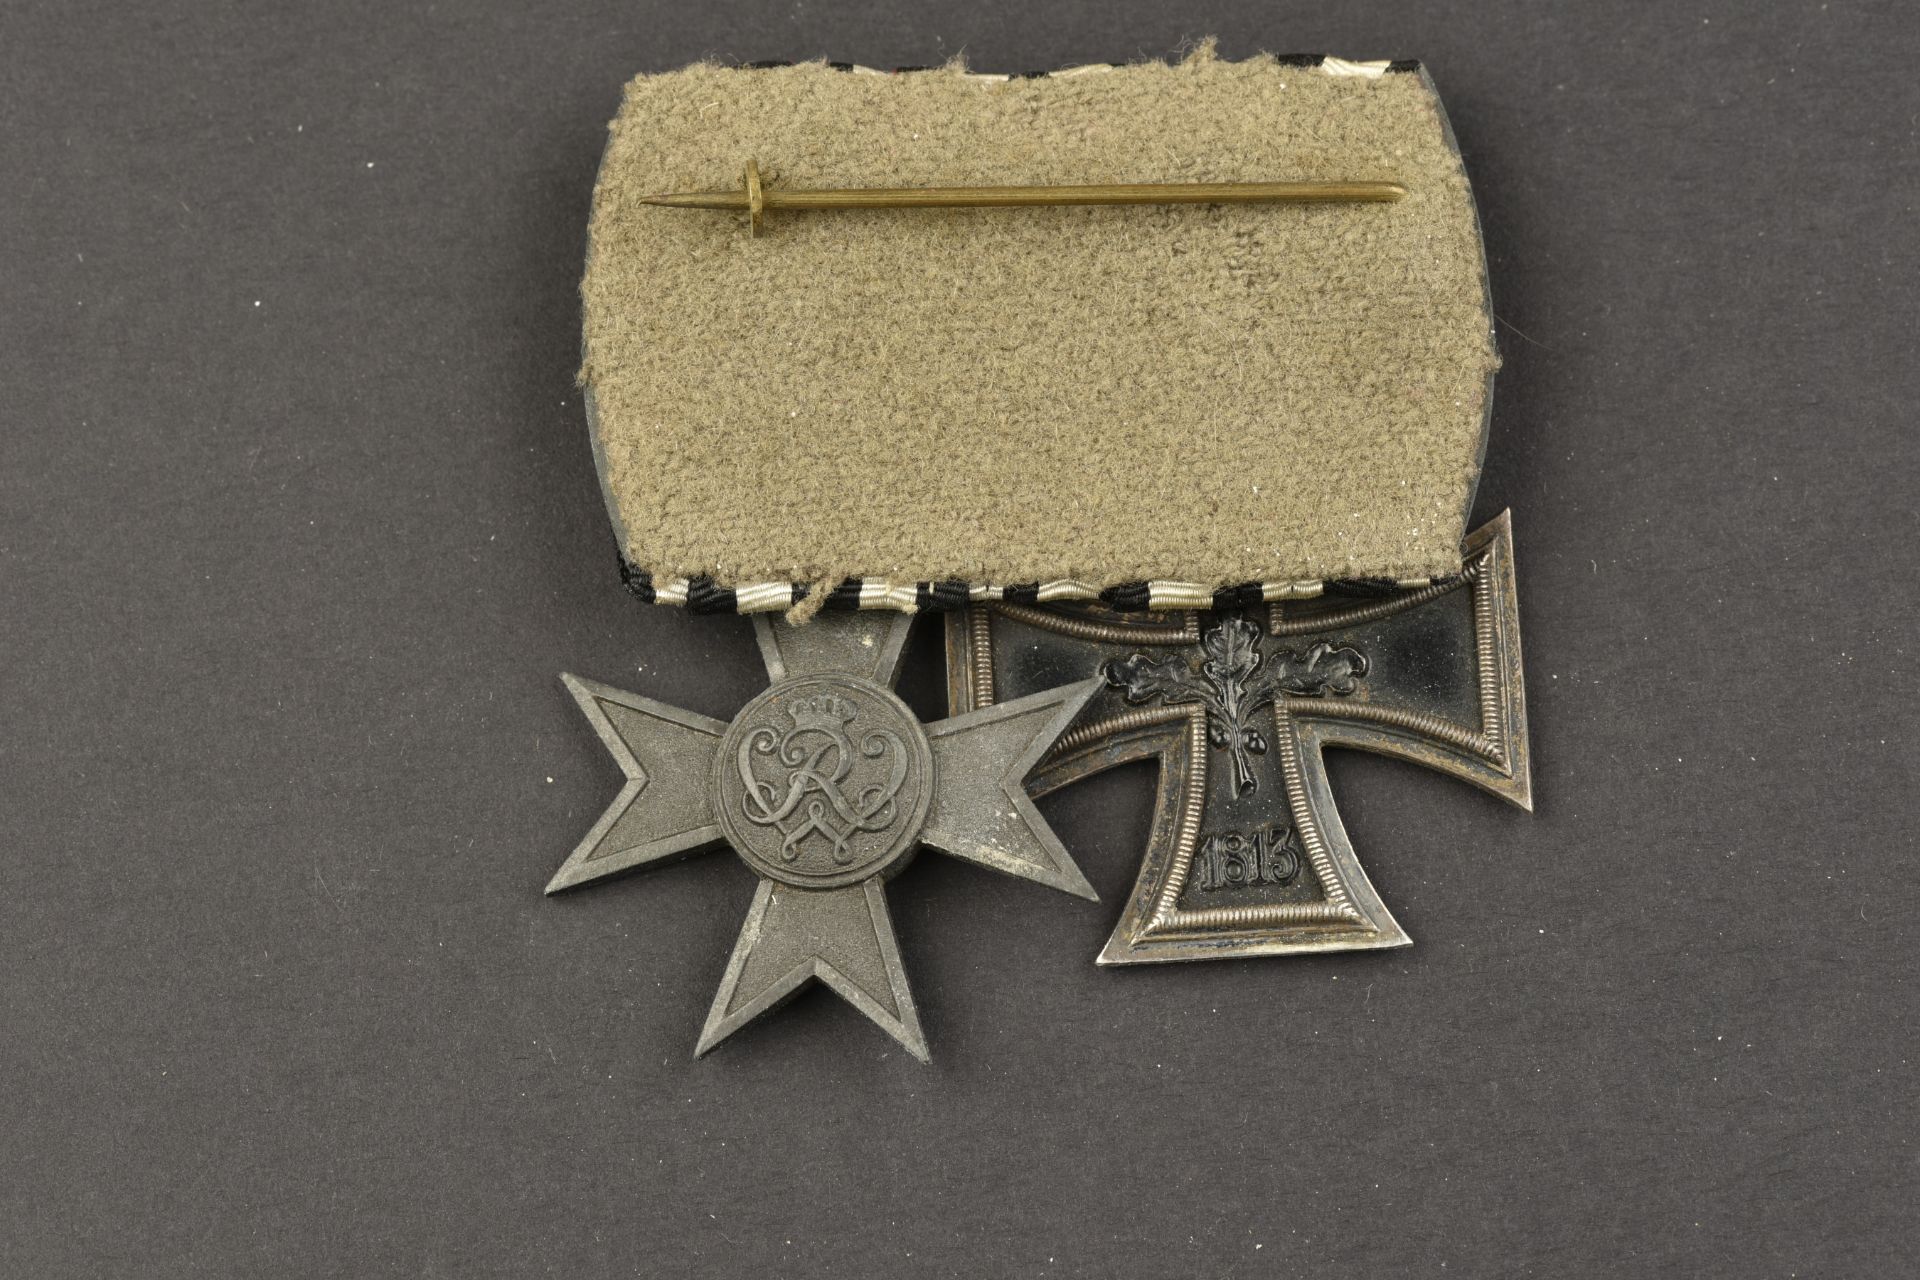 Decorations pendantes WWI. WWI pendent medals. - Image 2 of 2